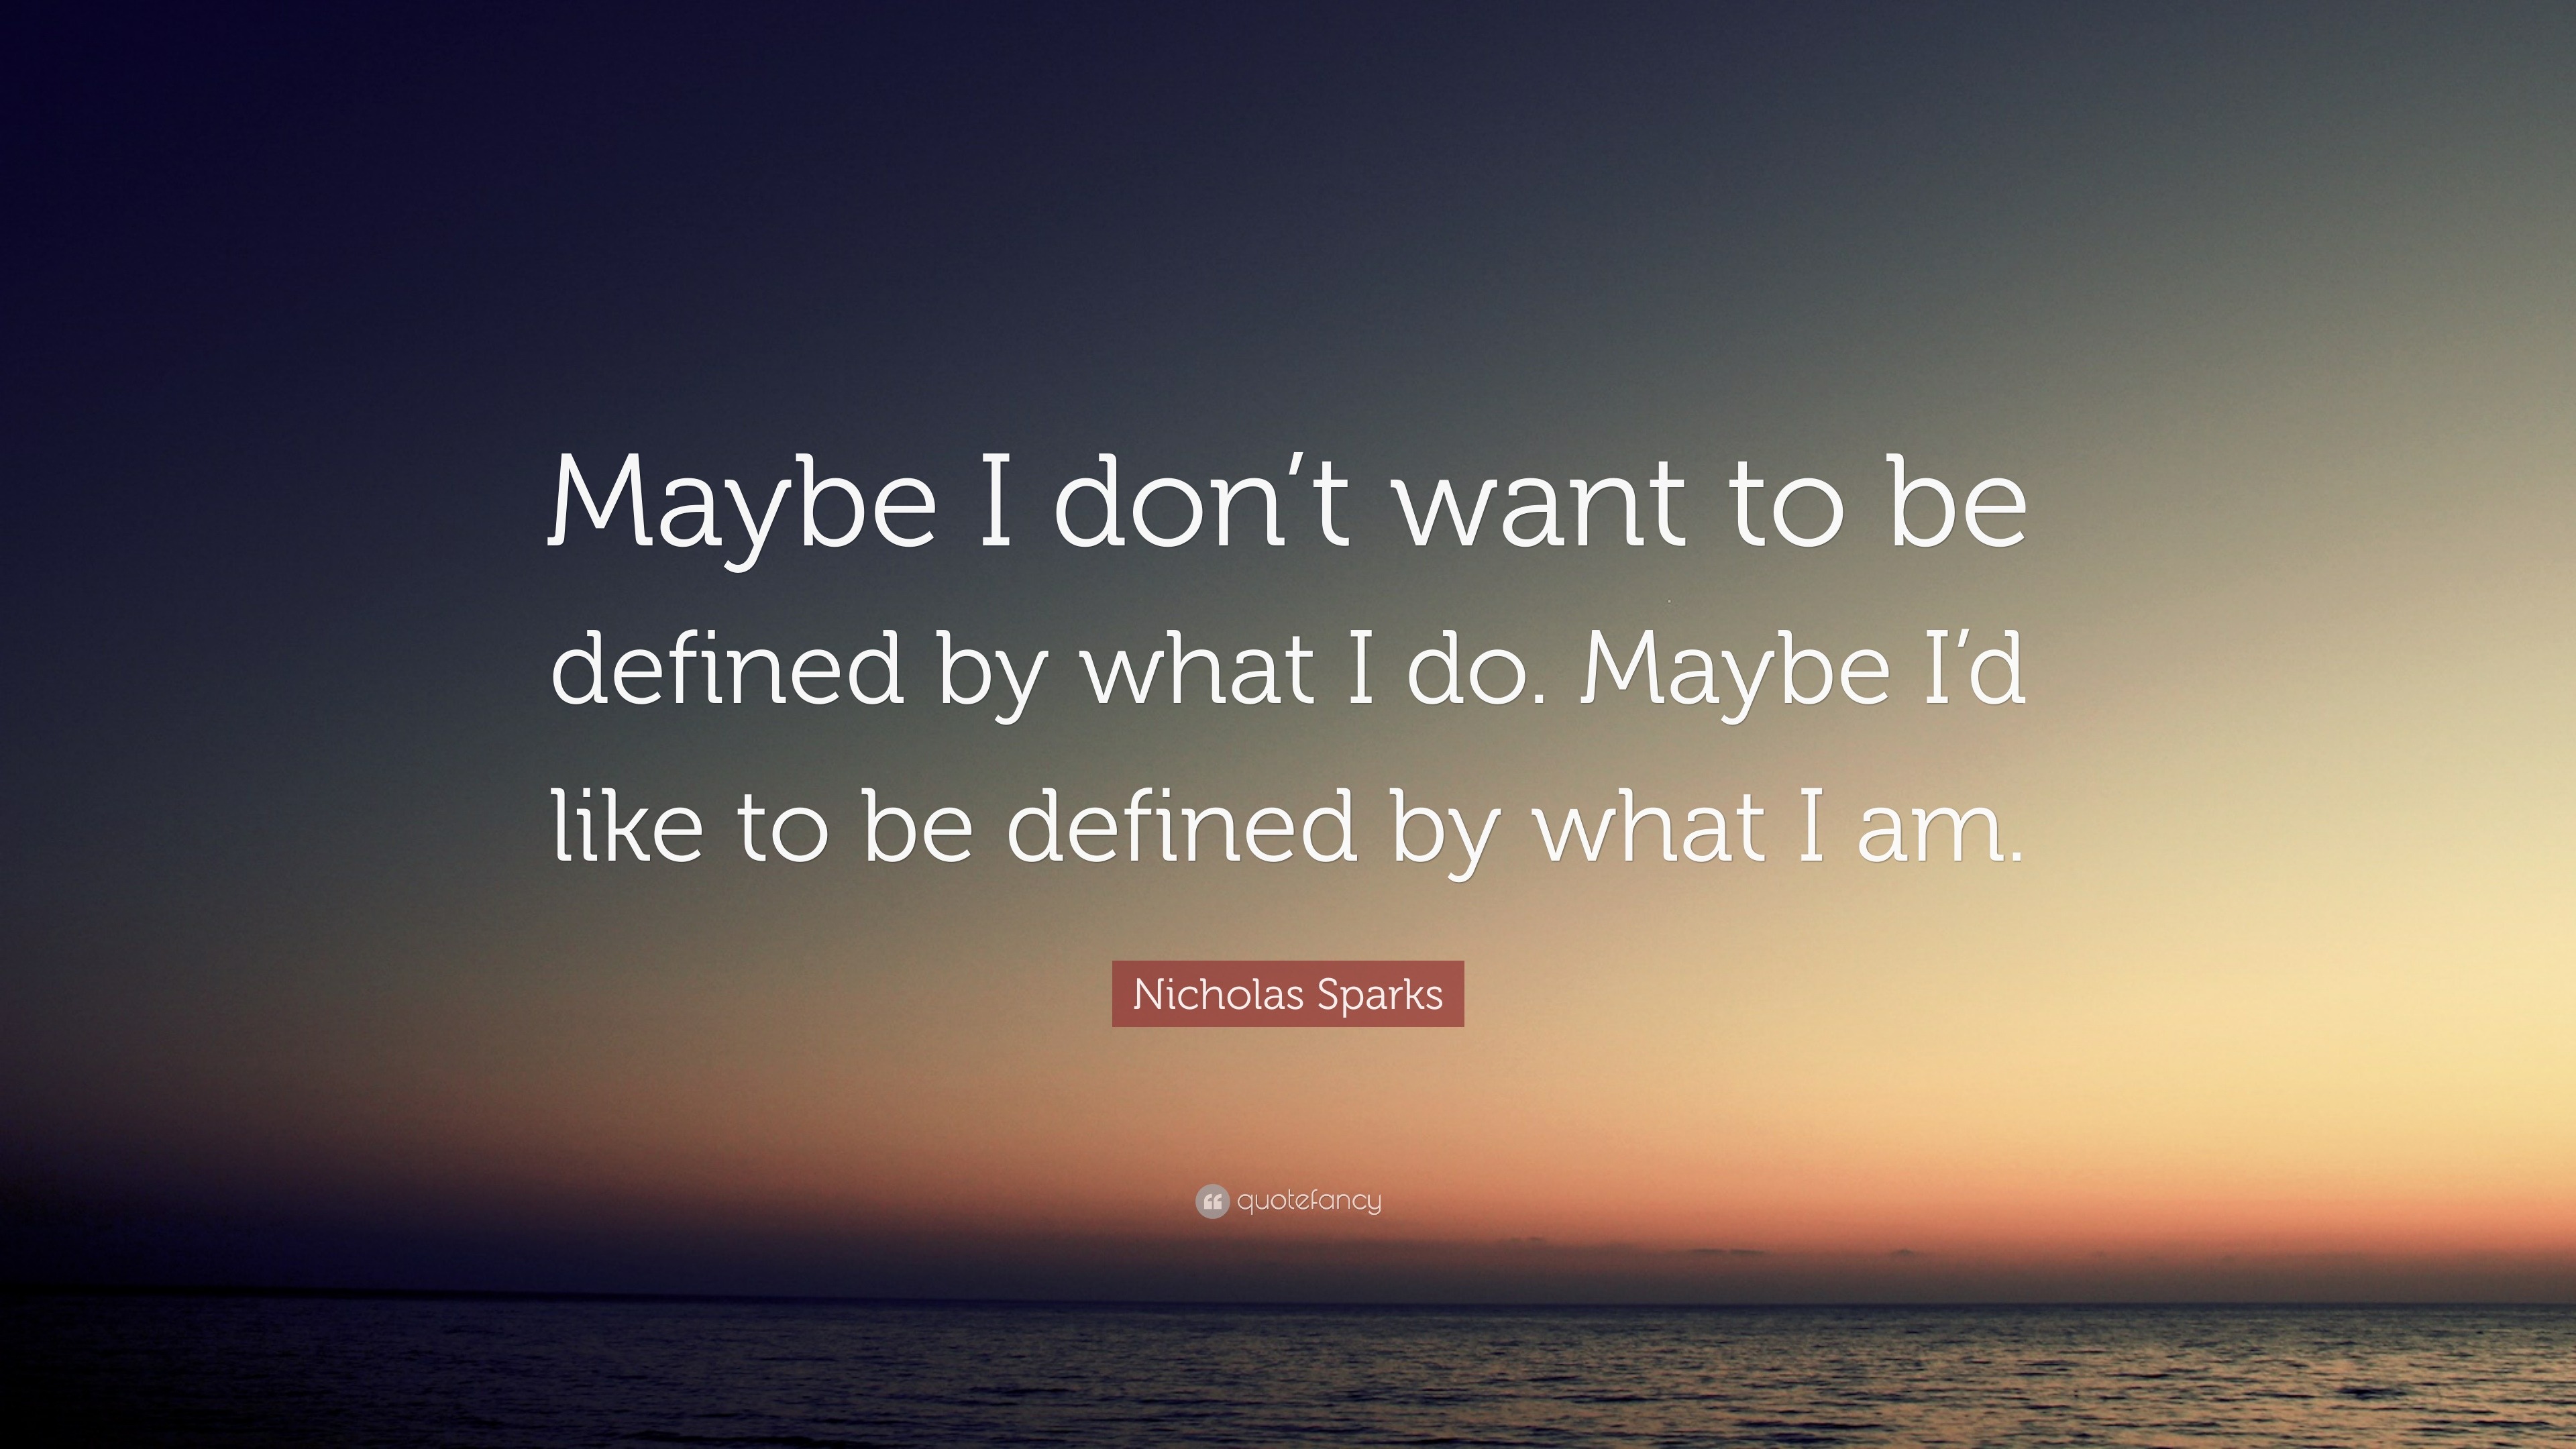 Nicholas Sparks Quote: “Maybe I don’t want to be defined by what I do ...